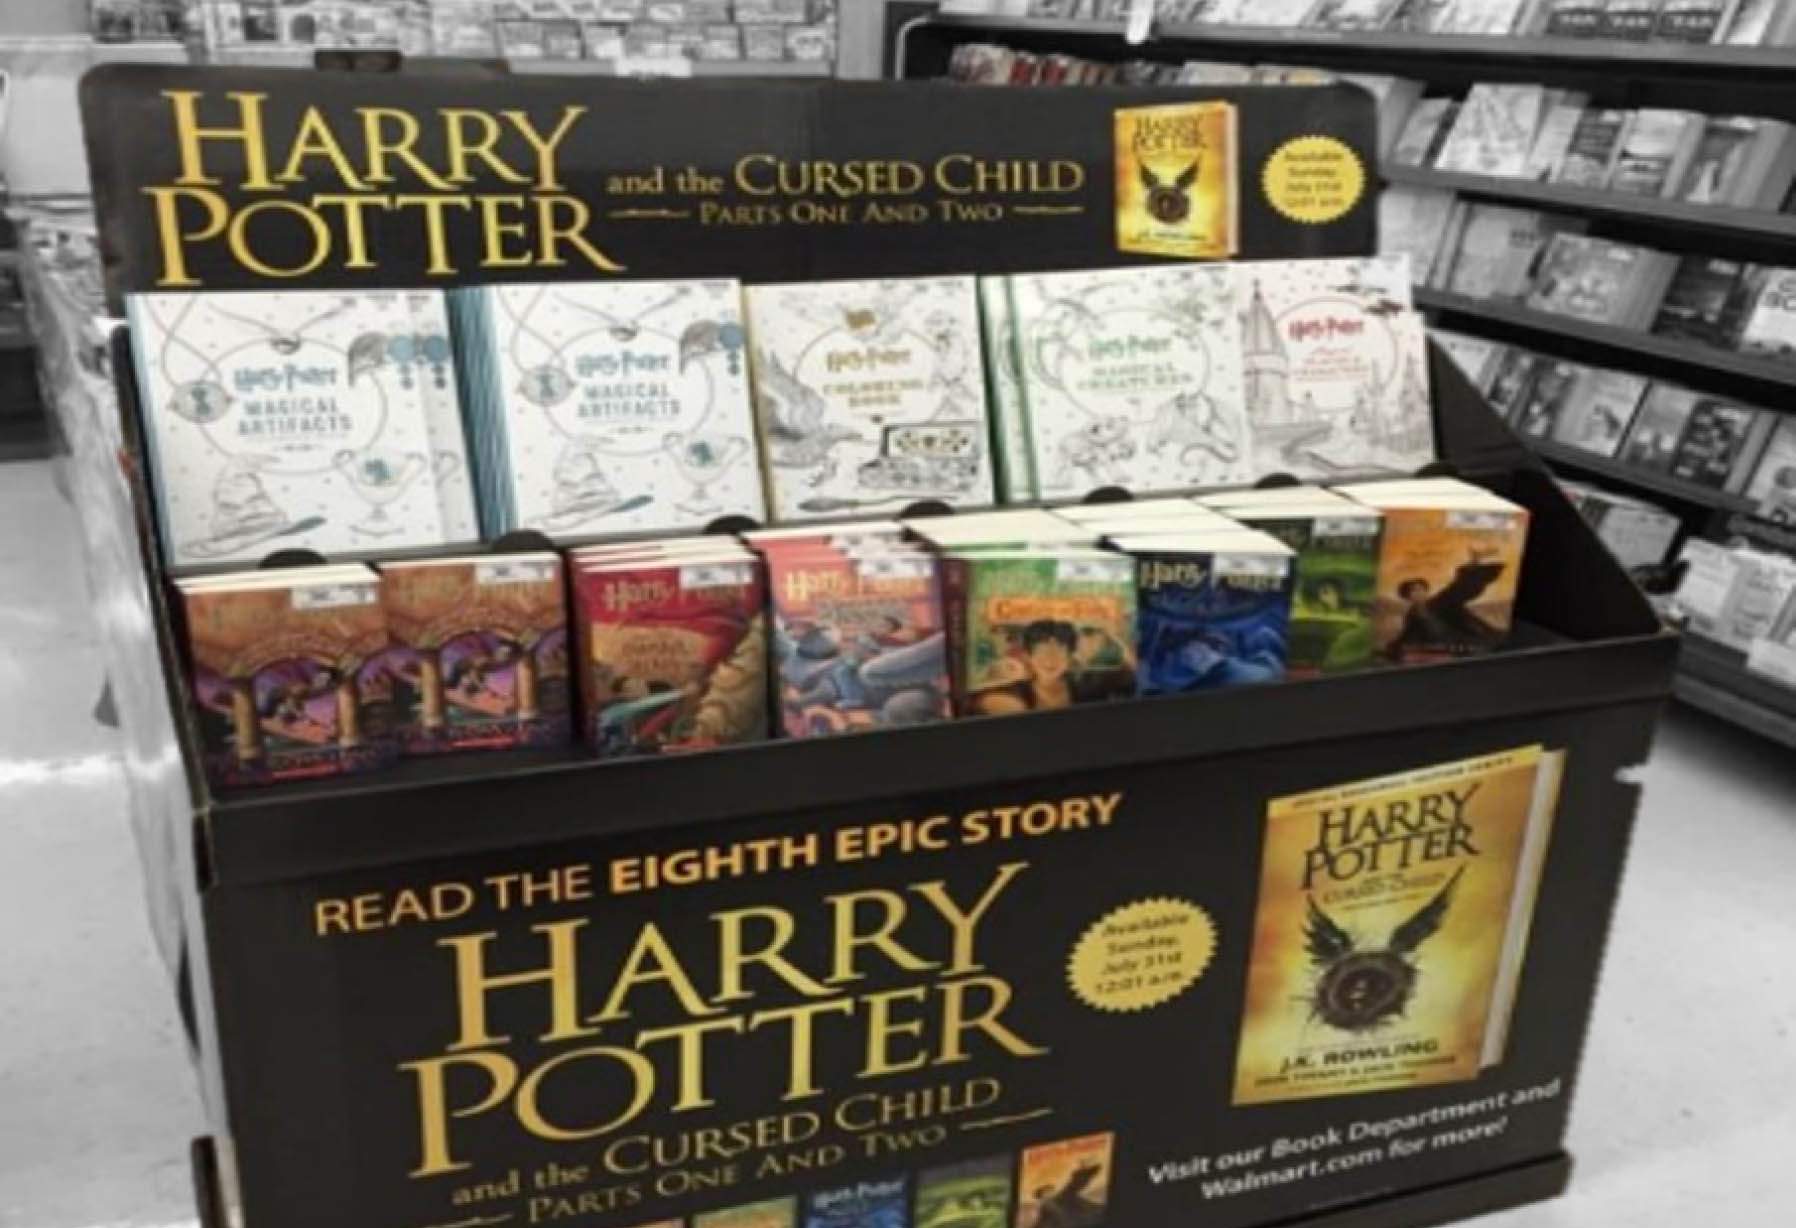 Display for Harry Potter books by J.K. Rowling